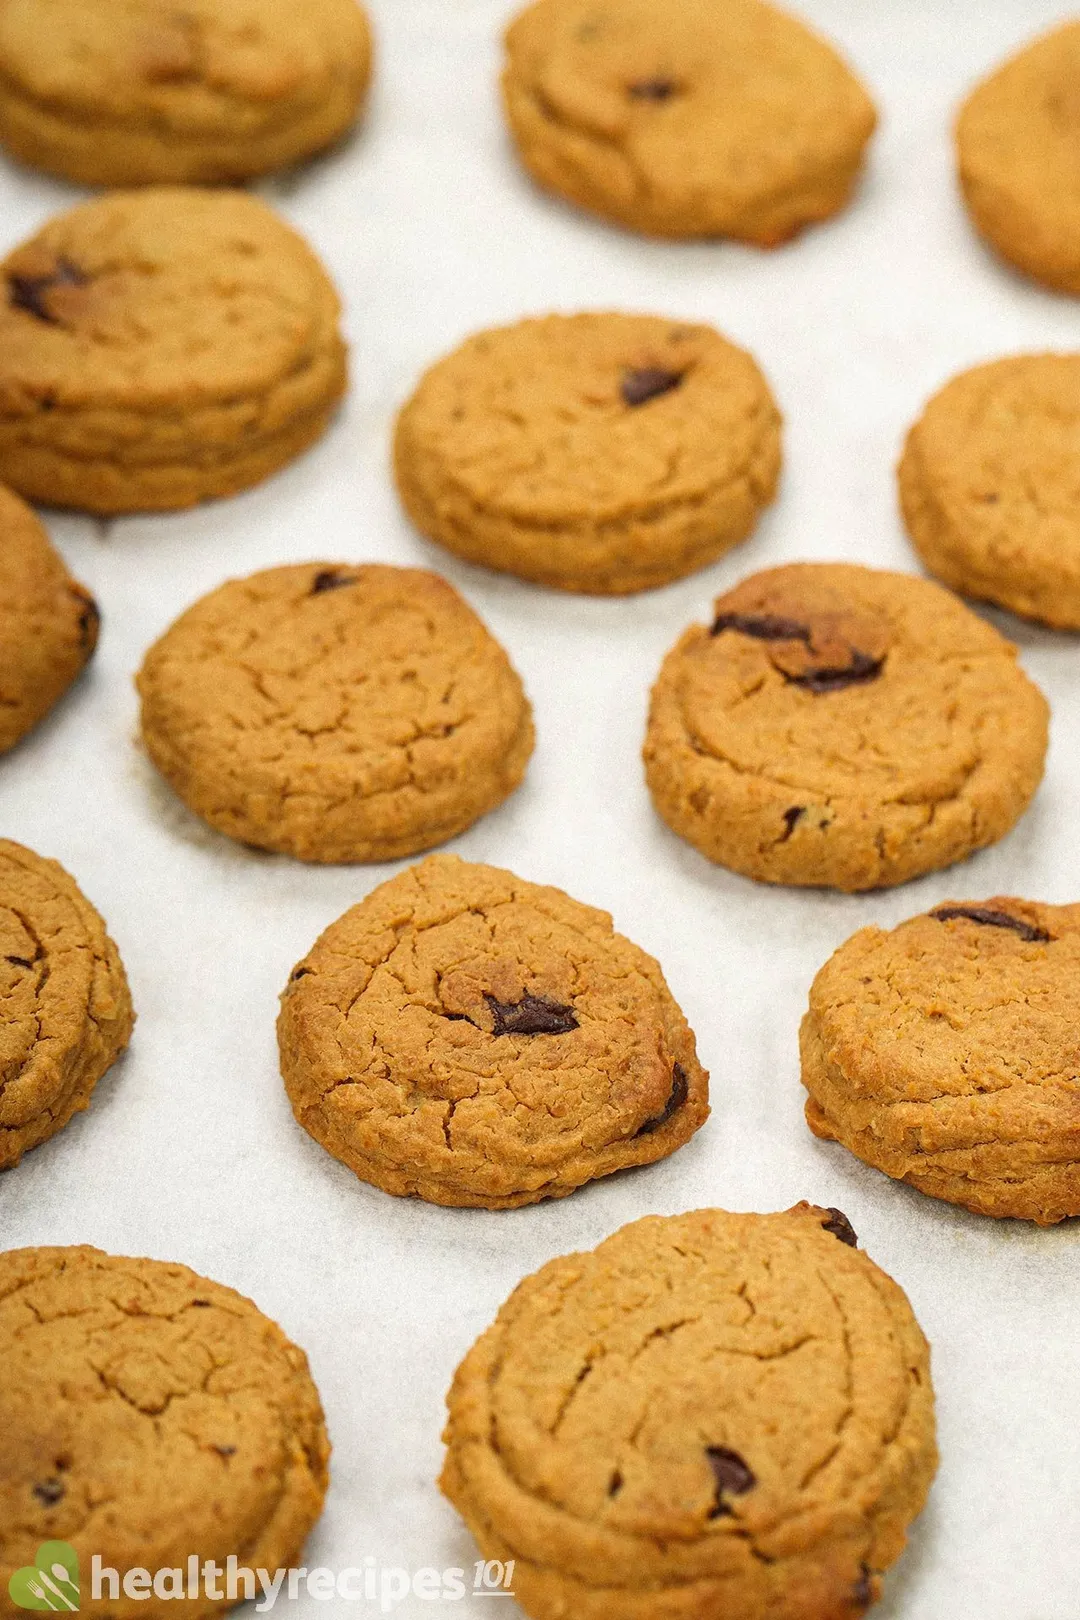 Freshly baked cookies laid on a sheet pan lined with parchment paper.